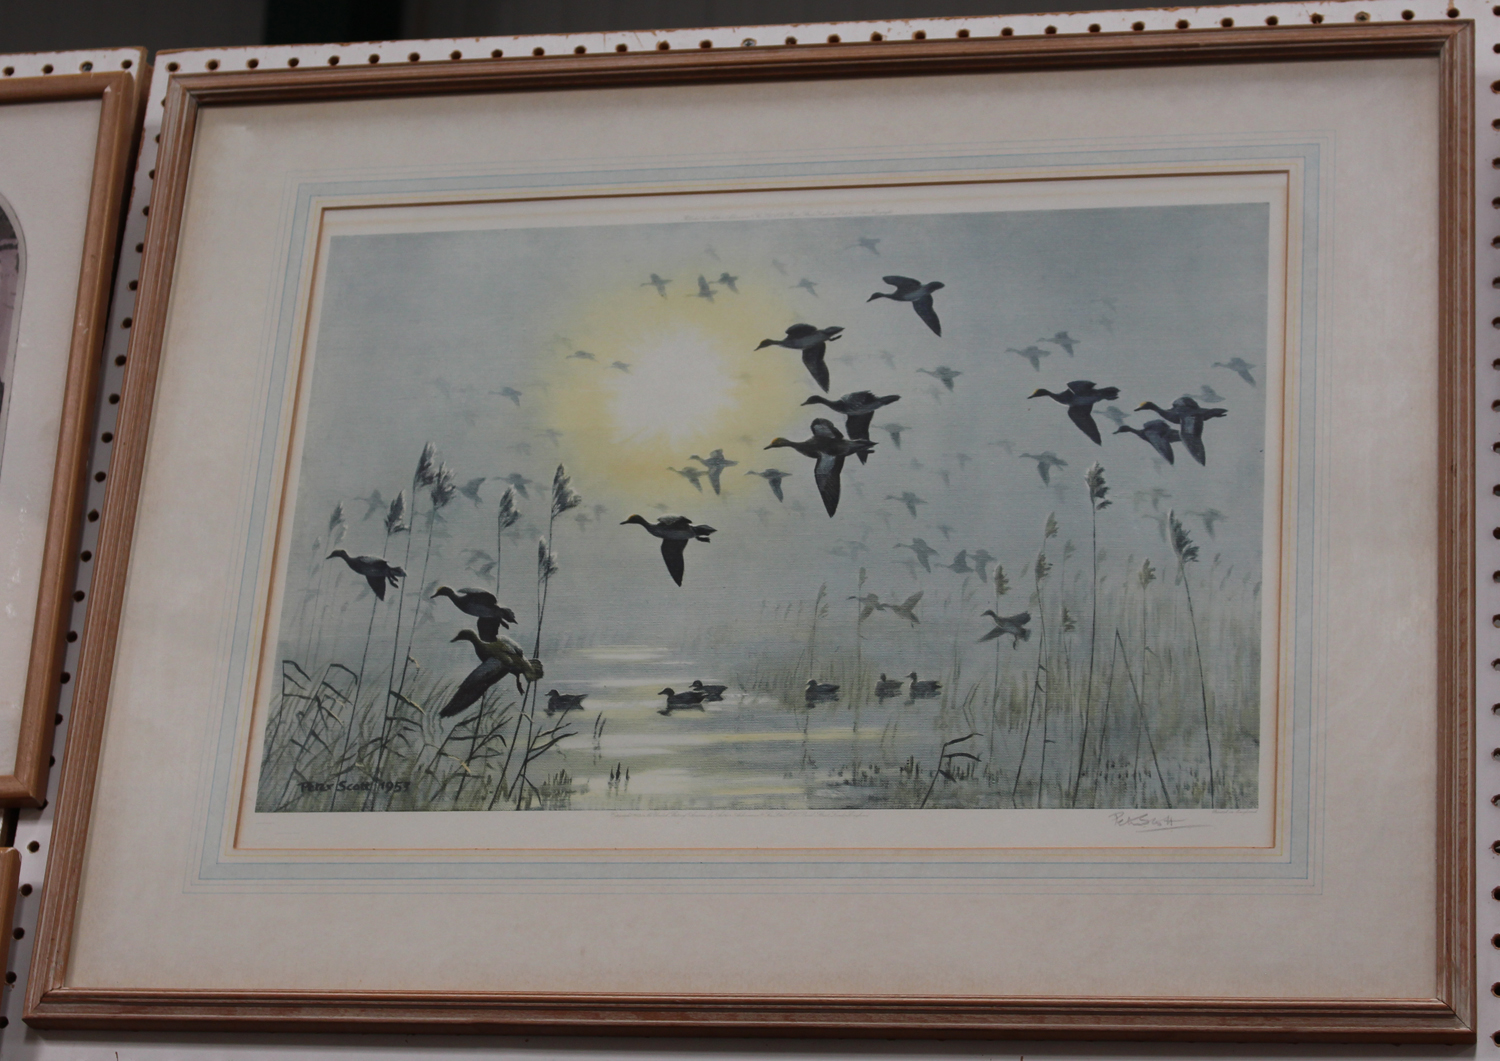 Peter Scott - 'The Wash at Dawn, Pinkfeet', colour print, signed in pencil recto, titled label - Image 6 of 10